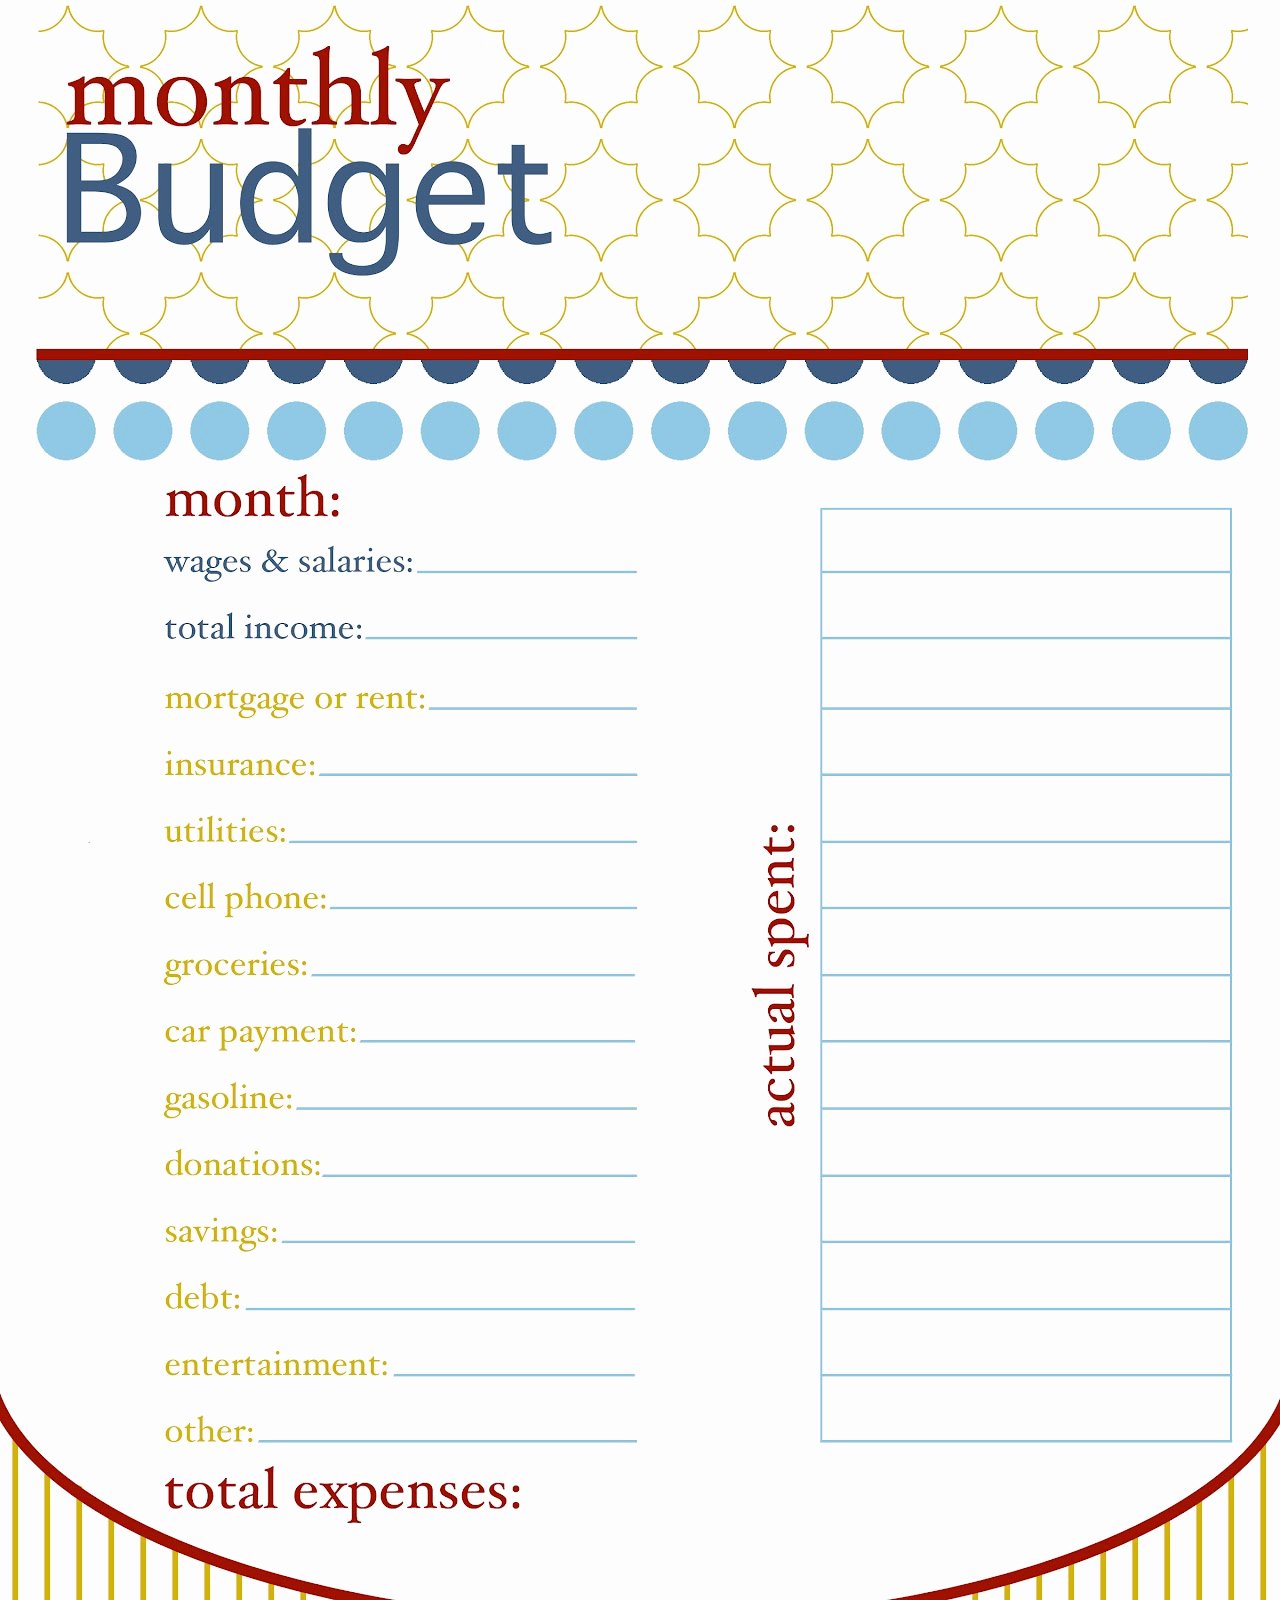 Monthly Budget Worksheet Printable Best Of Sissyprint Daily Planner organization